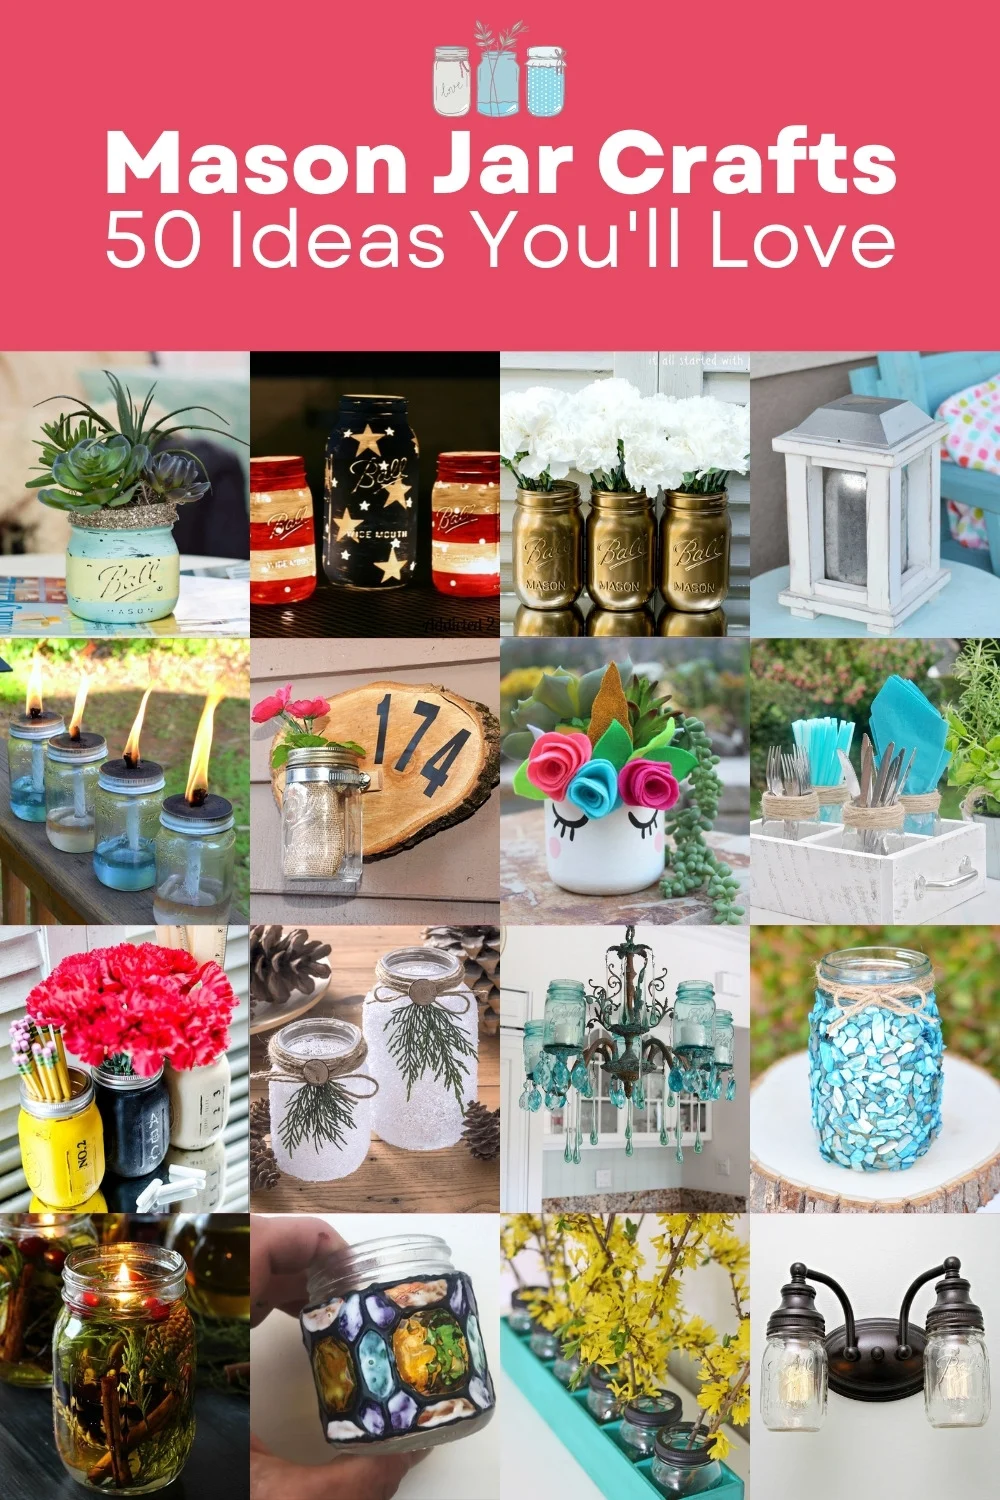 Quick & Easy: 50+ Crafts to Do at Home for Instant Fun - Mod Podge Rocks